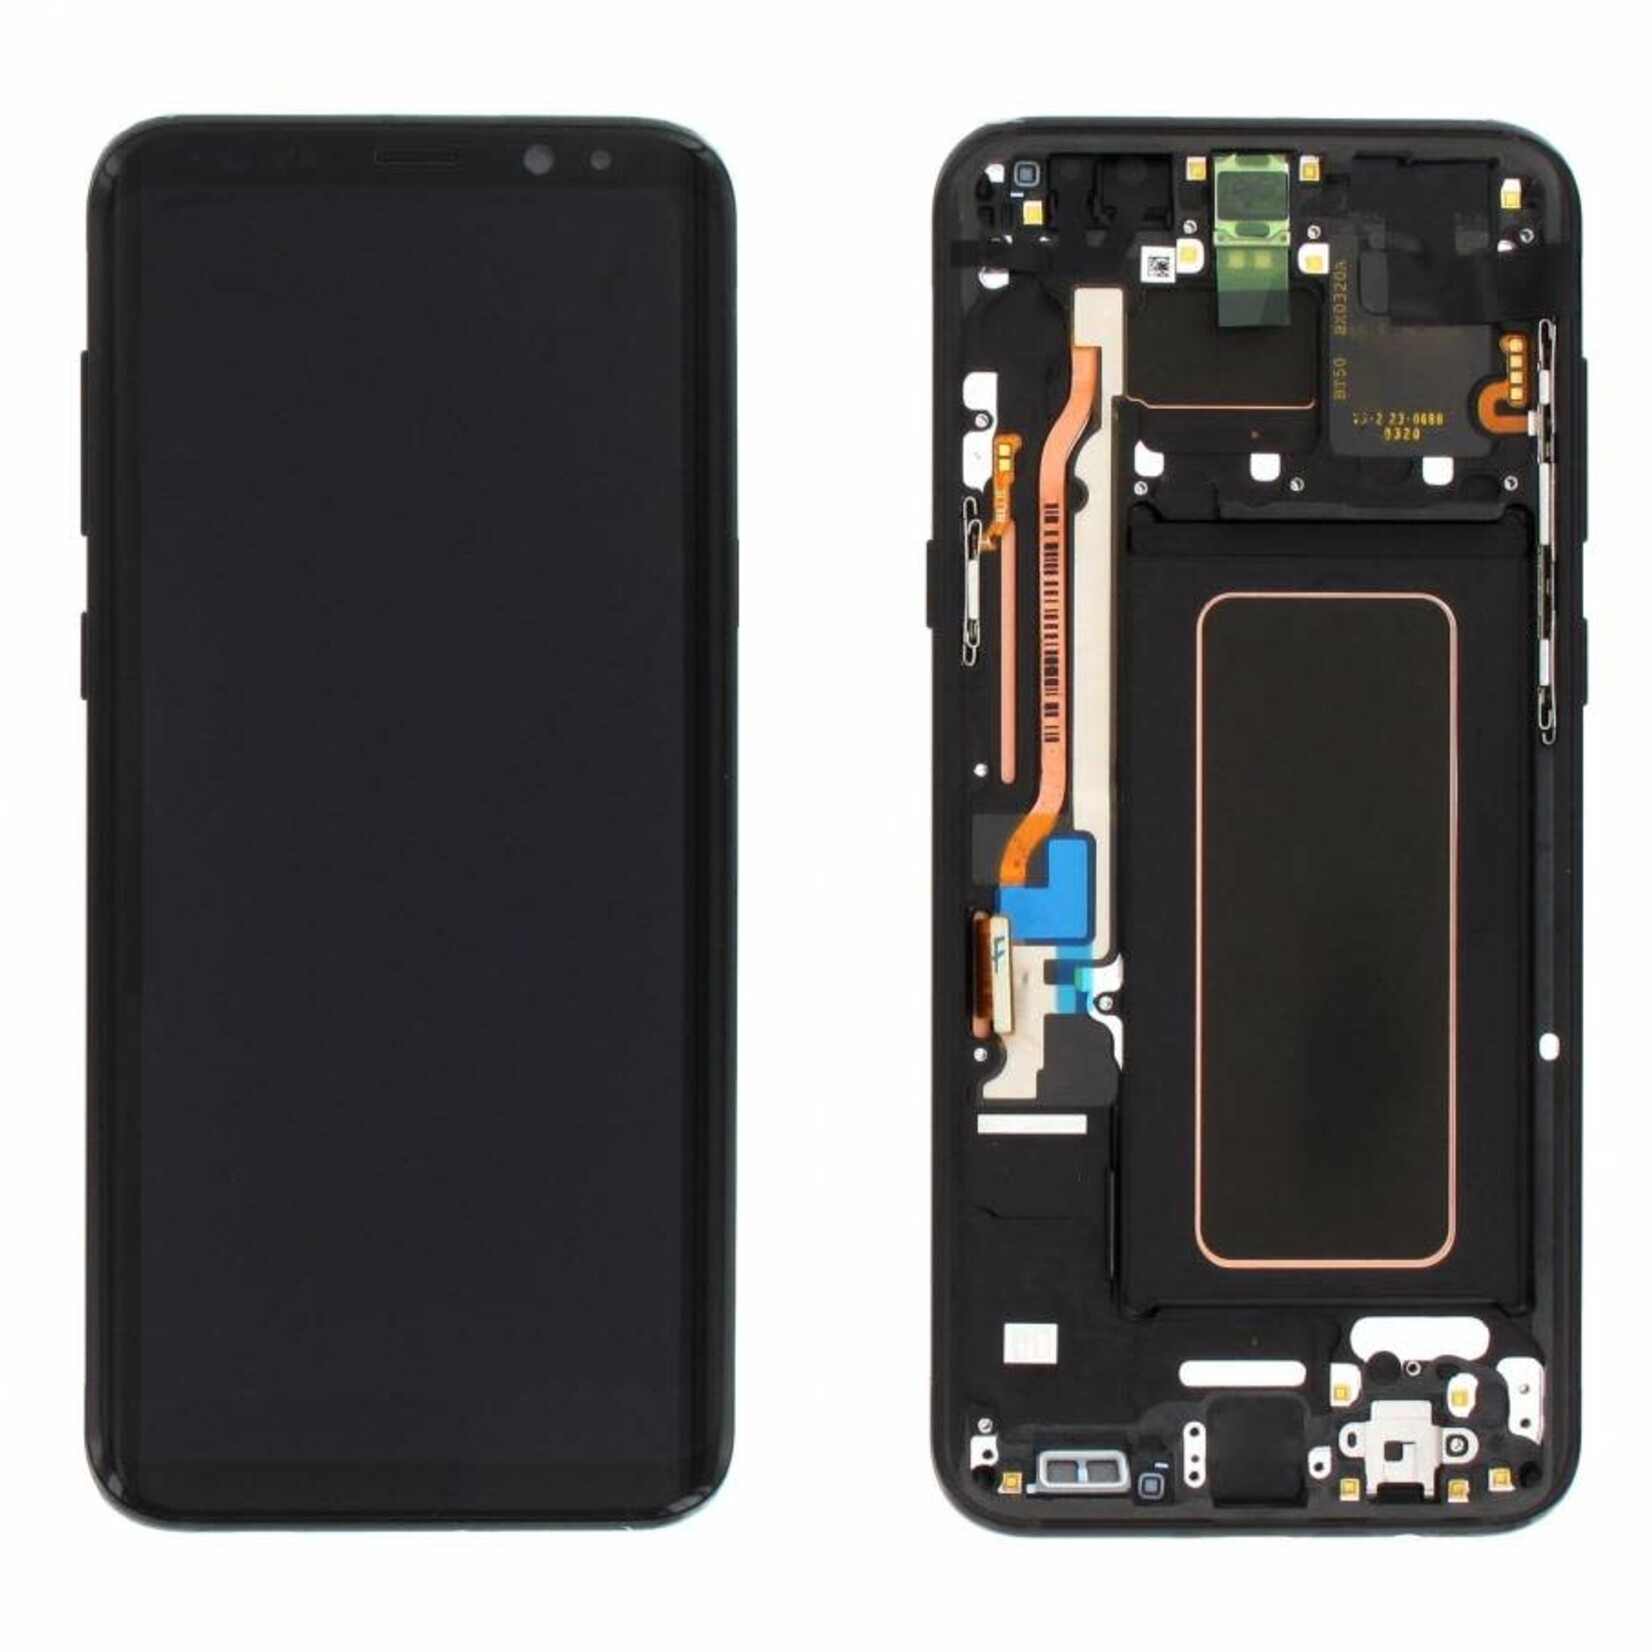 Samsung LCD DIGITIZER ASSEMBLY WITH FRAME SAMSUNG GALAXY S8 PLUS NOIR BLACK